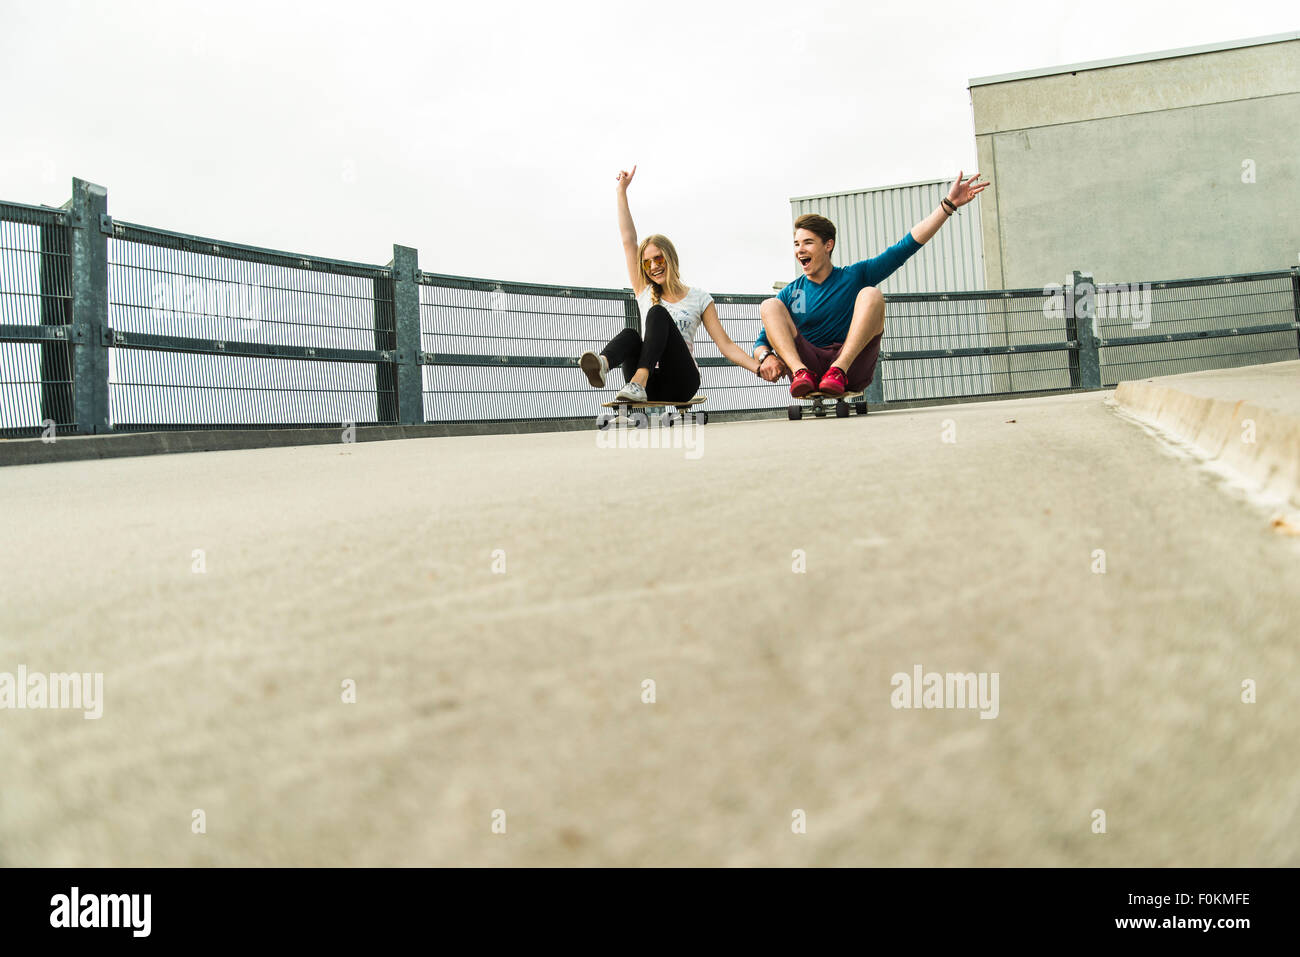 Enthusiastic young couple riding downhill with skateboards Stock Photo